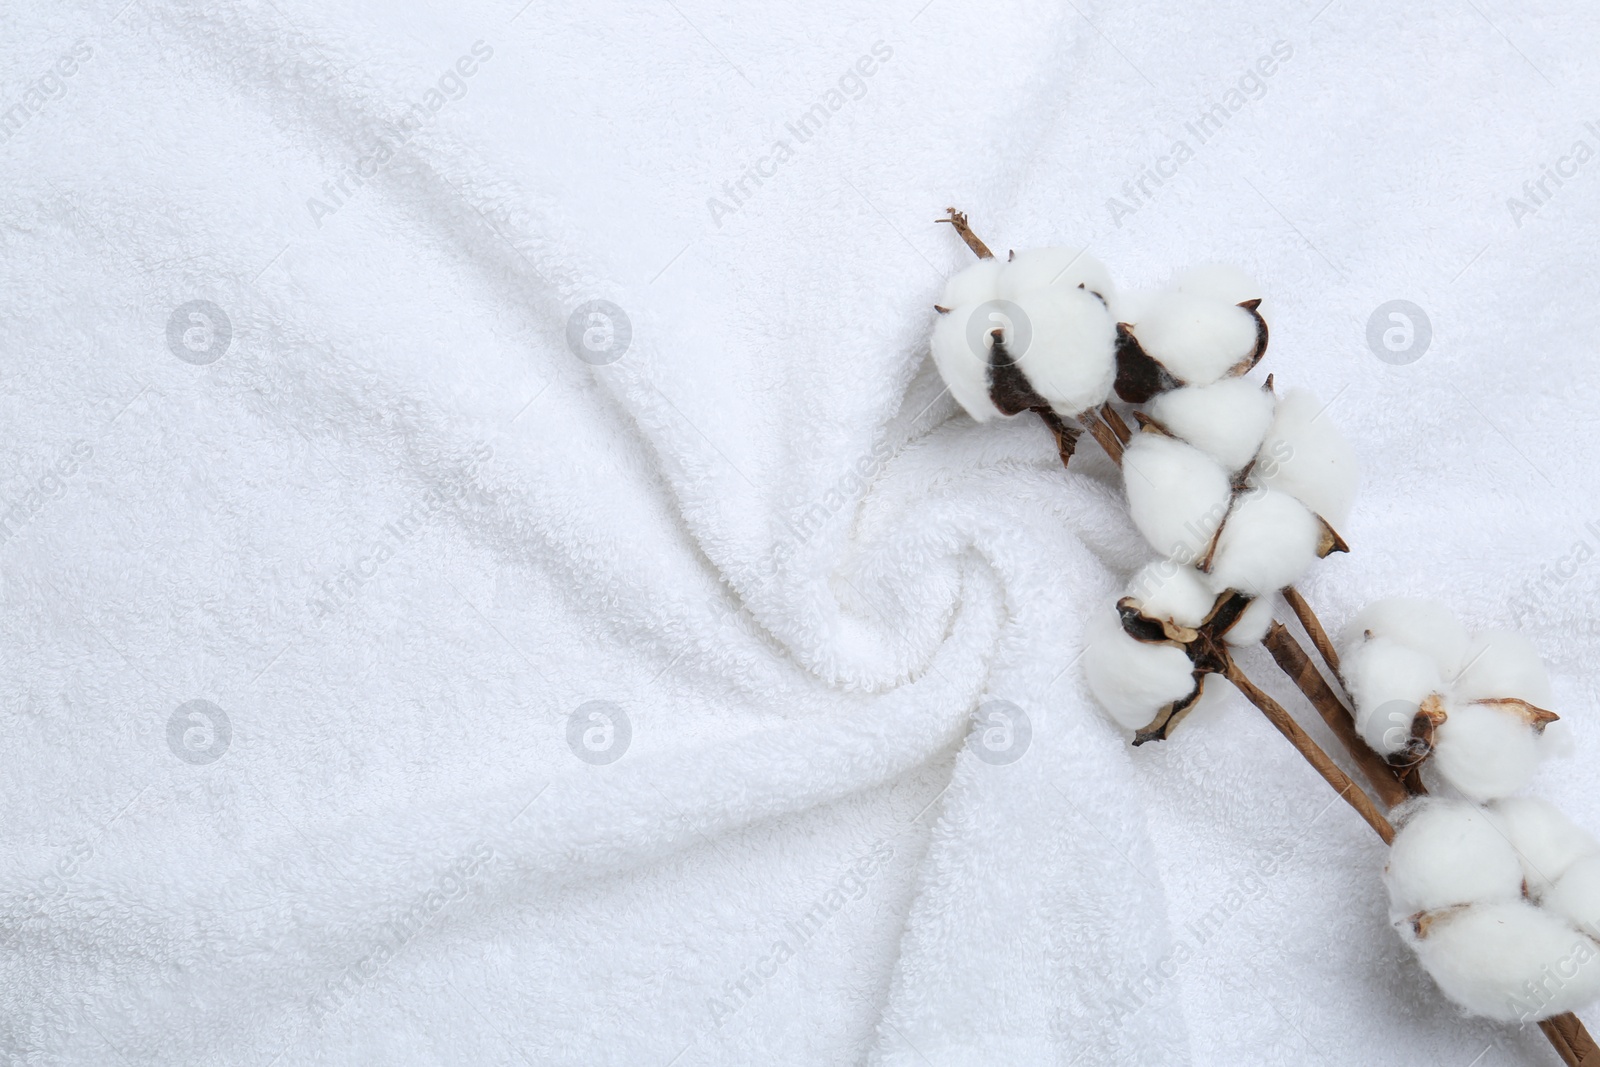 Photo of Cotton flowers on white terry towel, top view